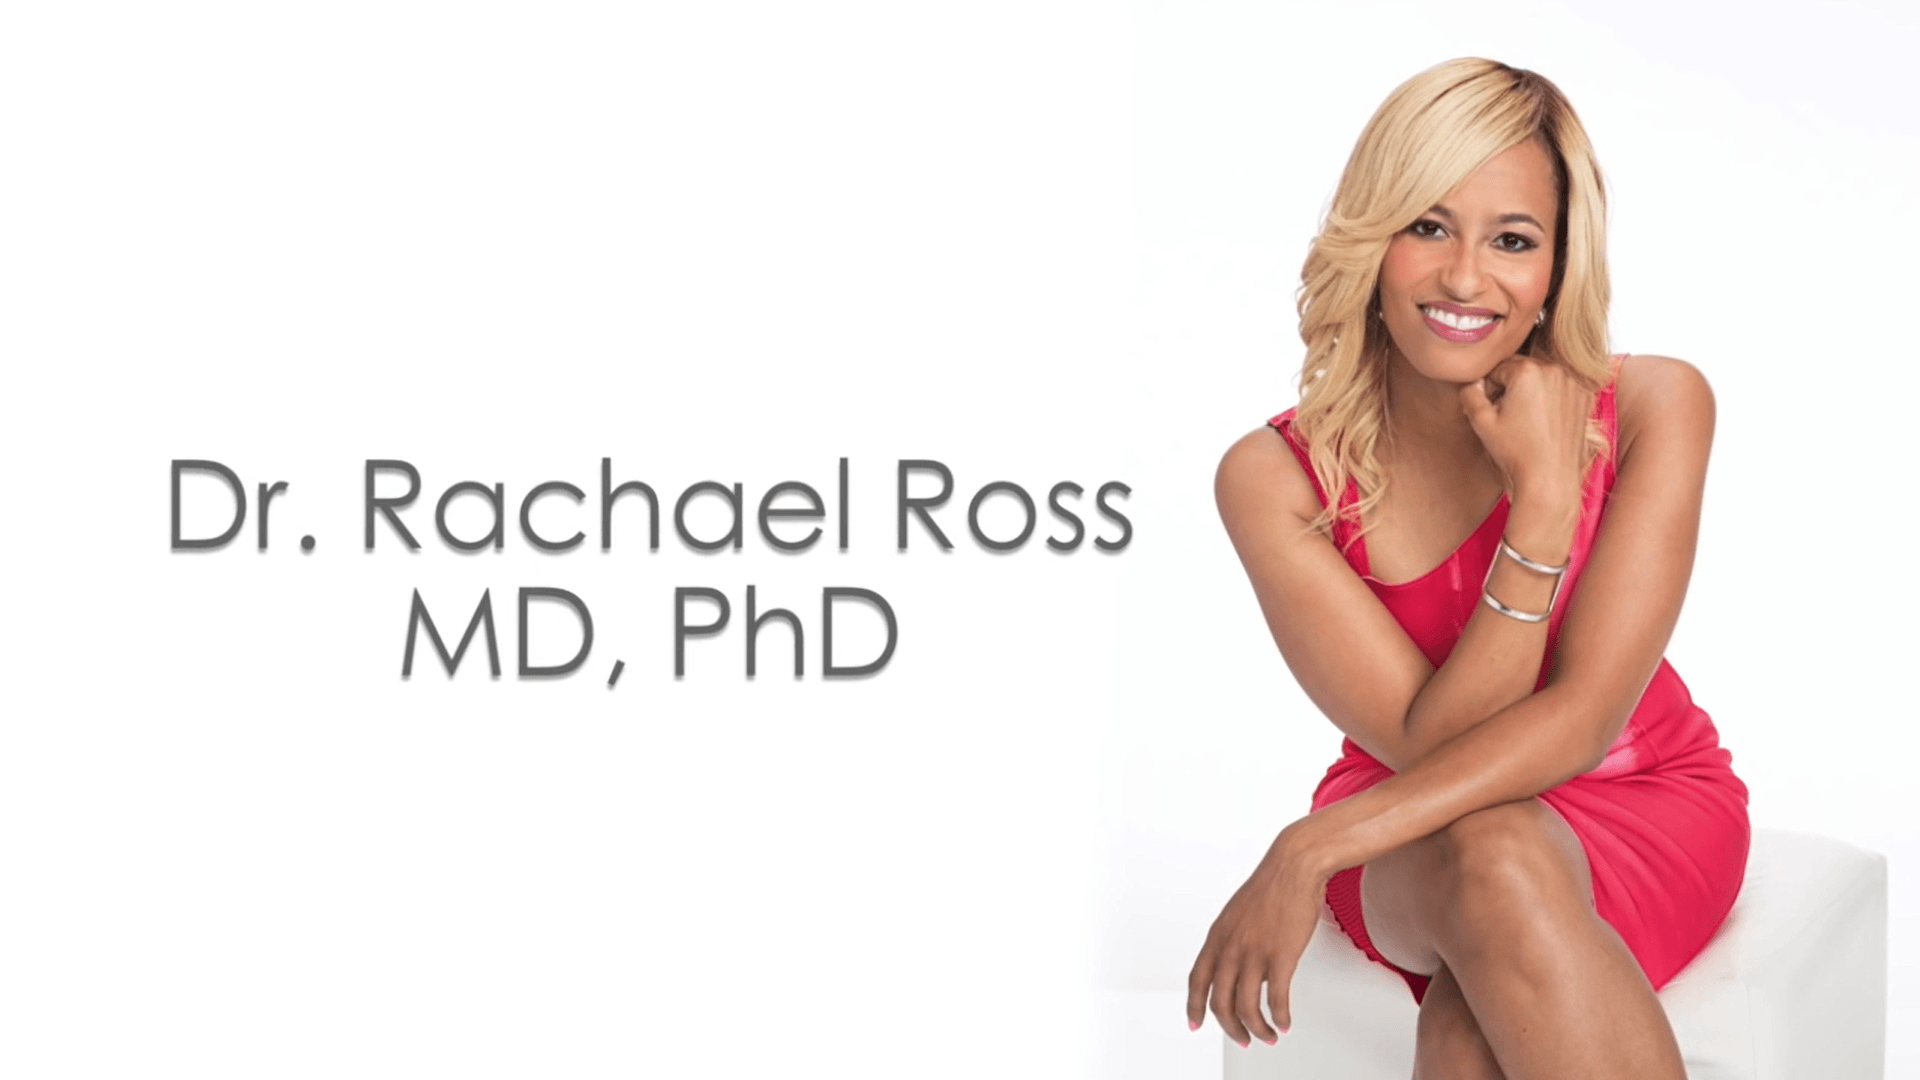 Get to Know Dr. Rachael Ross in Just 30 Seconds! 